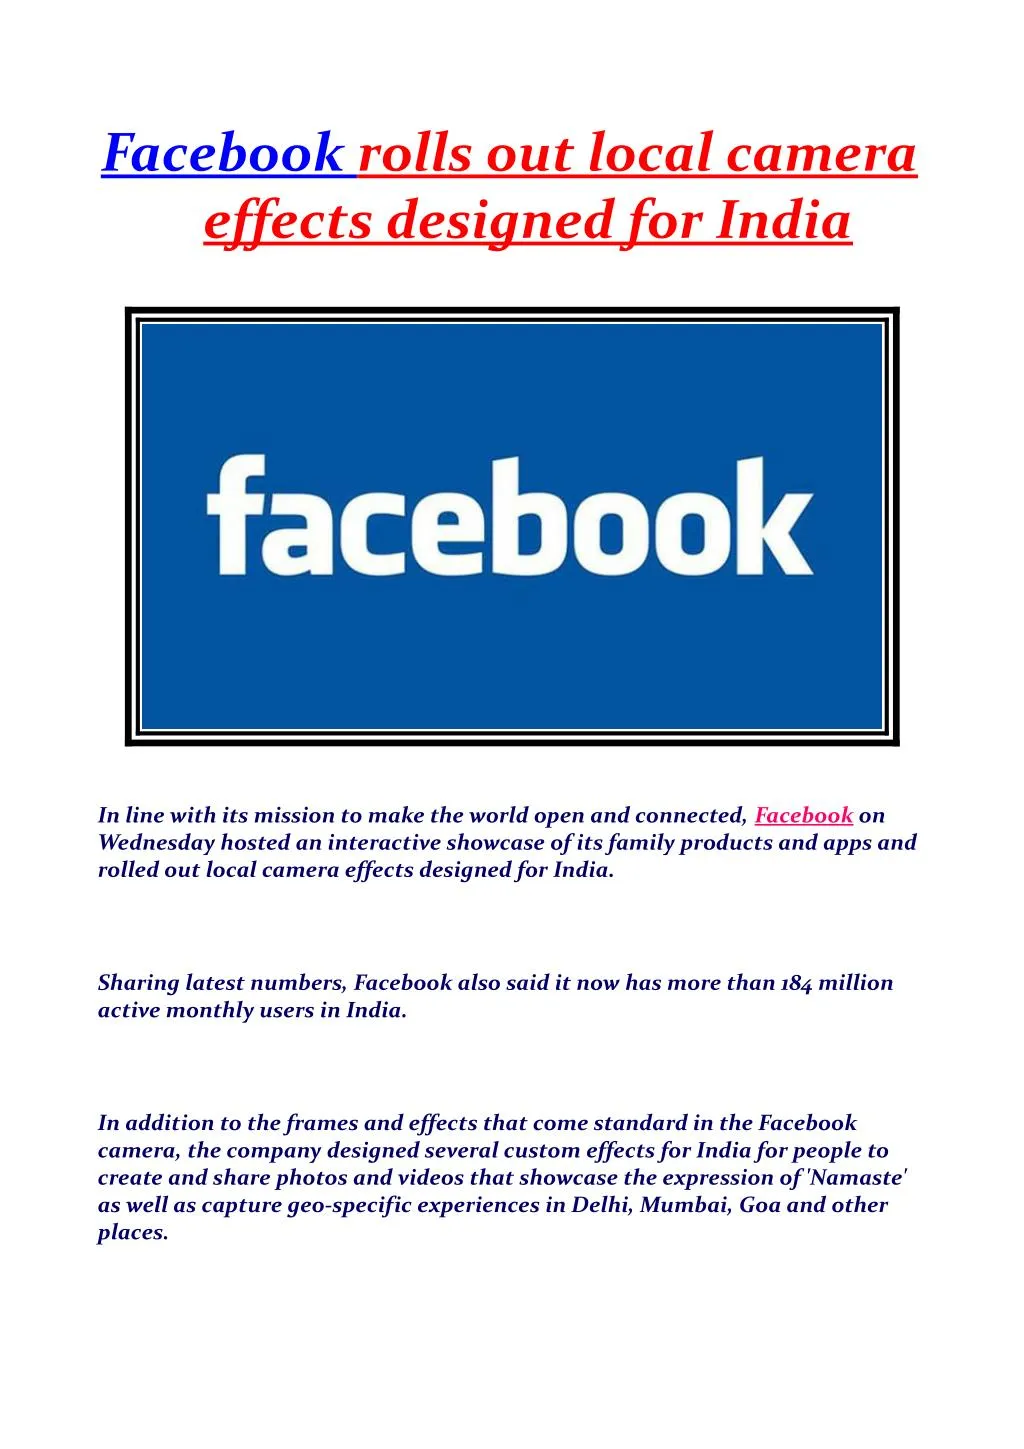 facebook effects designed for india